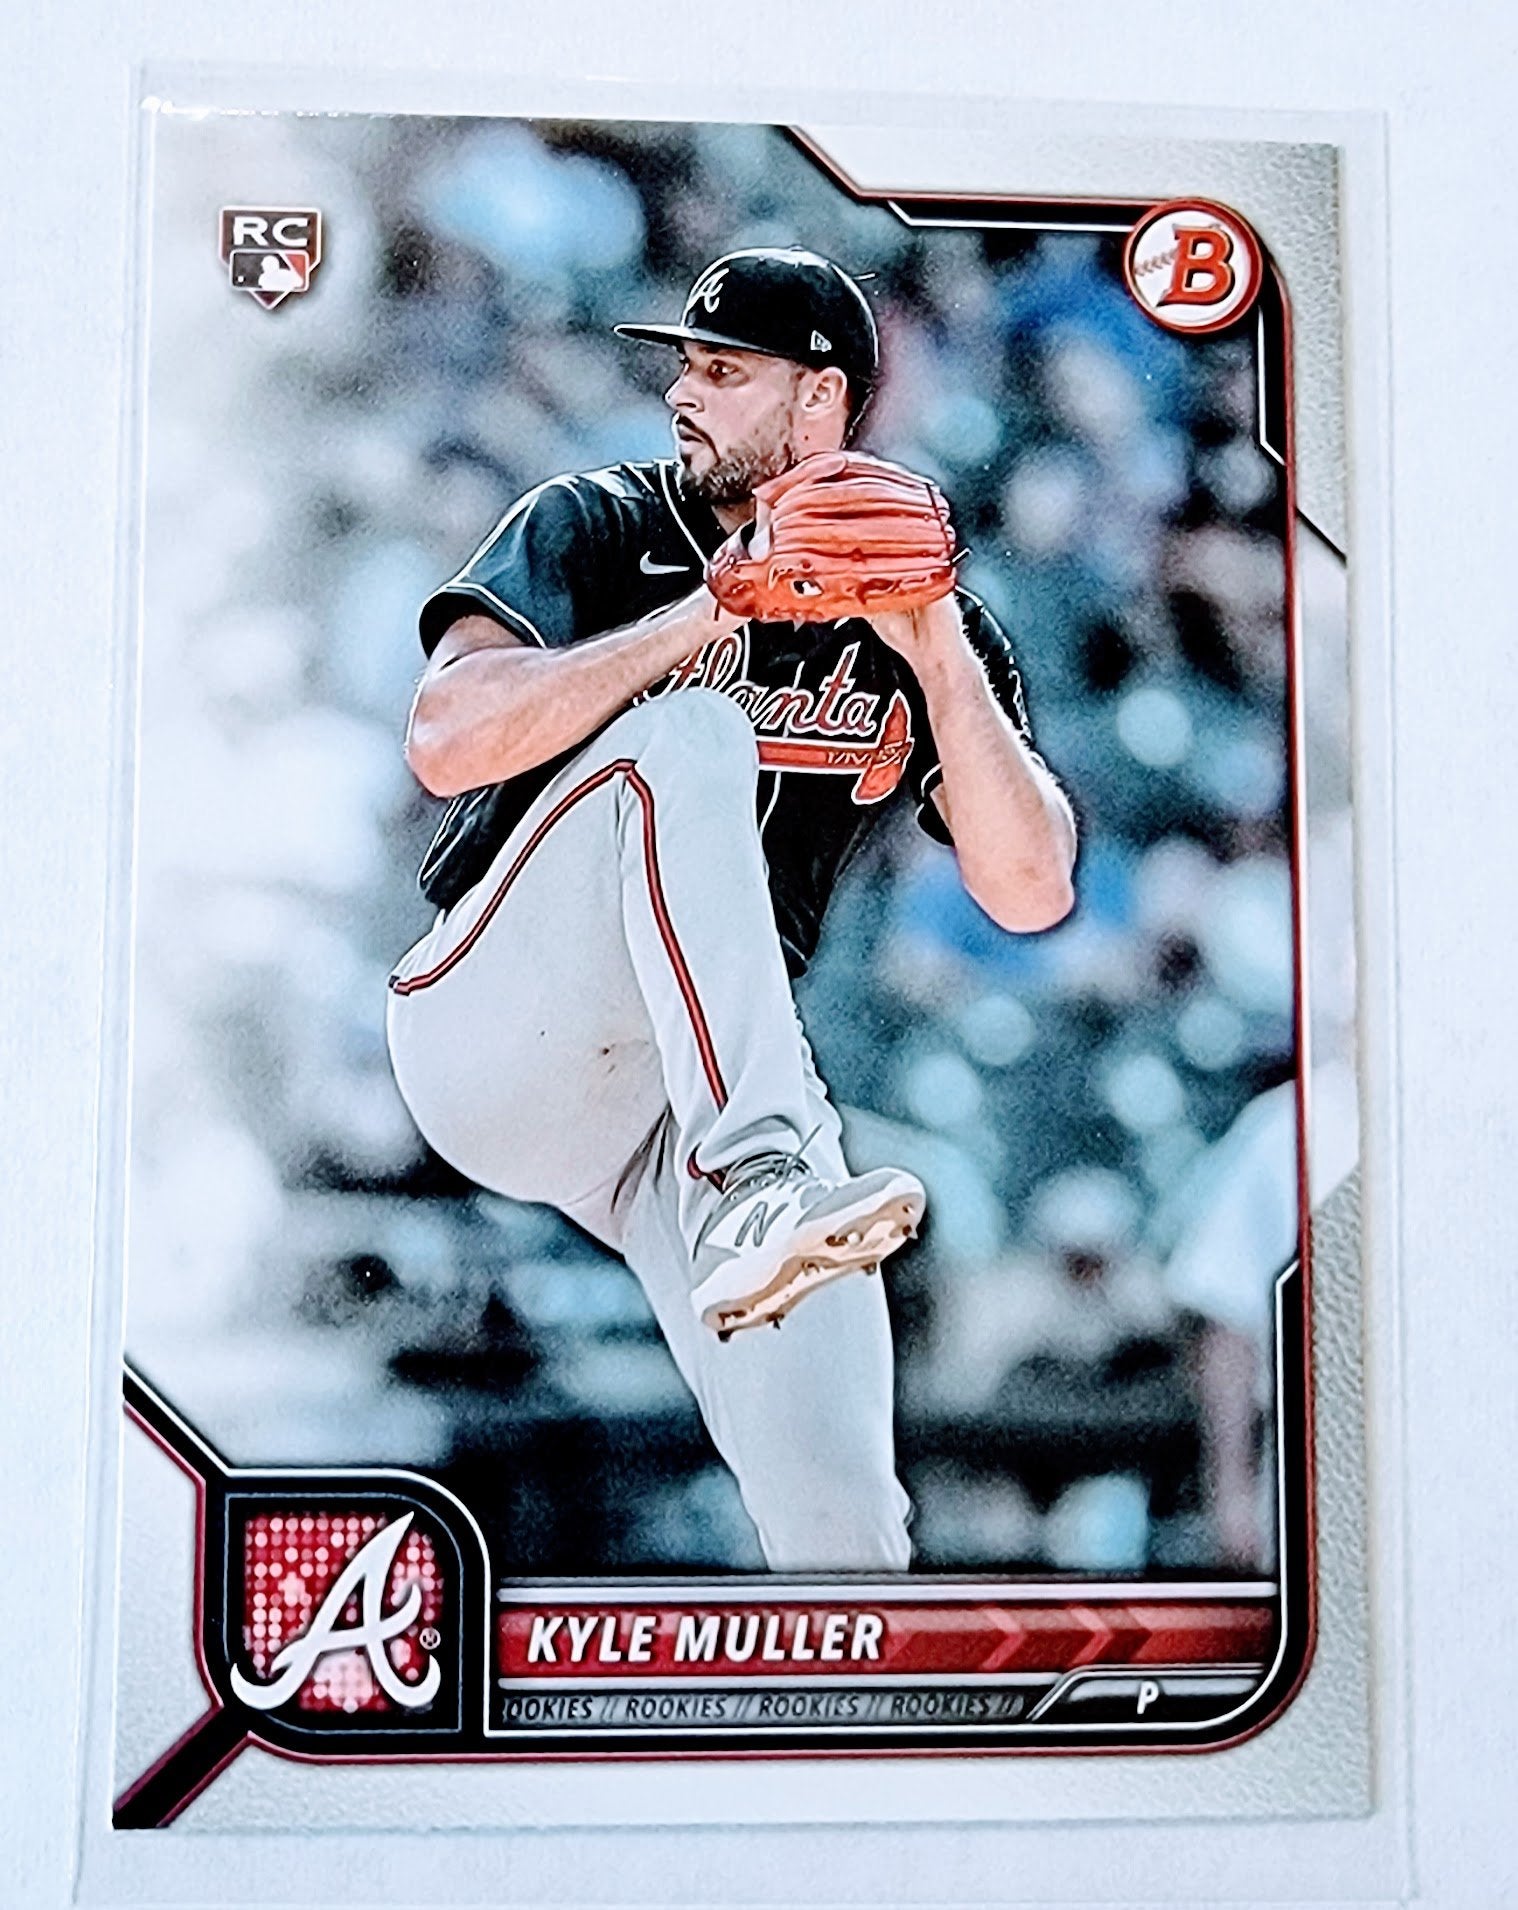 2022 Bowman Kyle Muller Rookie Baseball Trading Card SMCB1 simple Xclusive Collectibles   